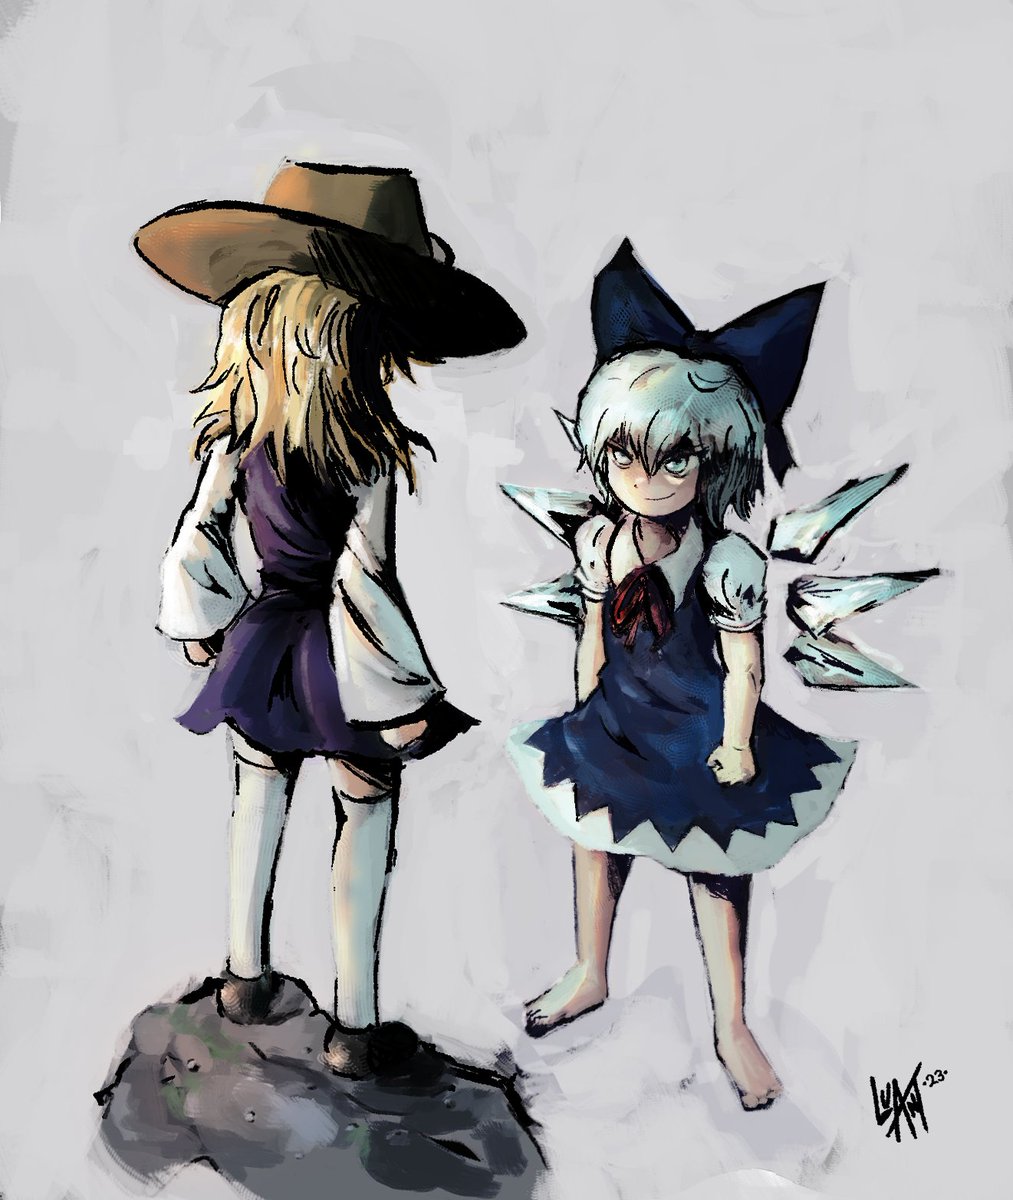 Me with dead frogs in my backpack #touhou